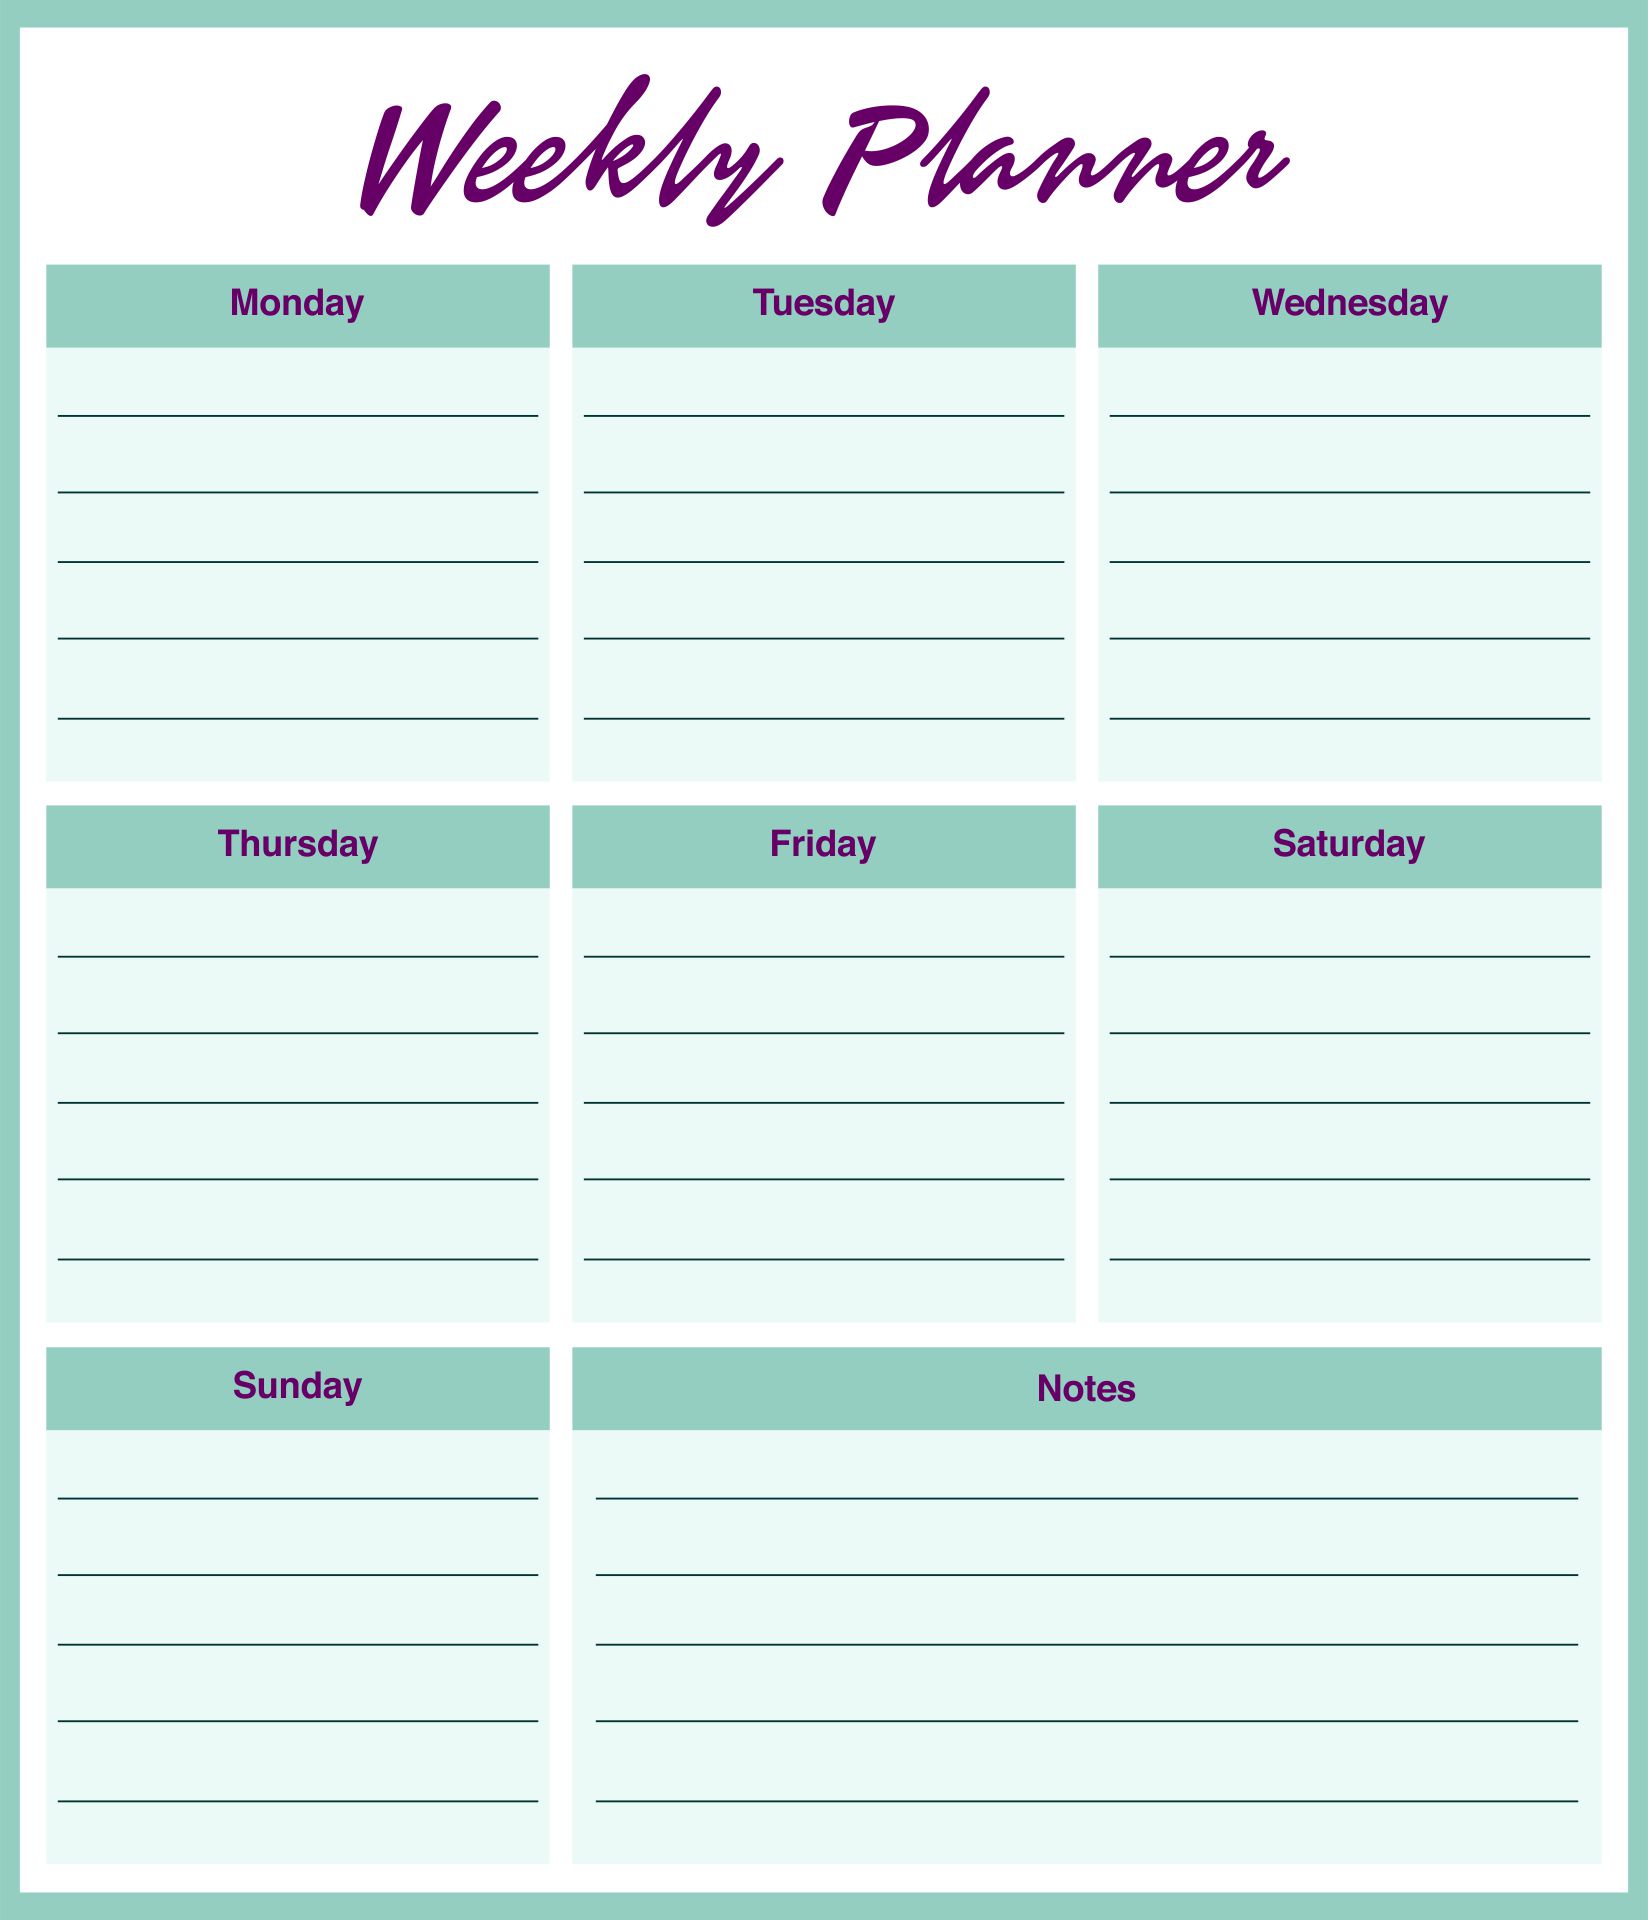 6-best-images-of-student-homework-planners-cute-planners-printable